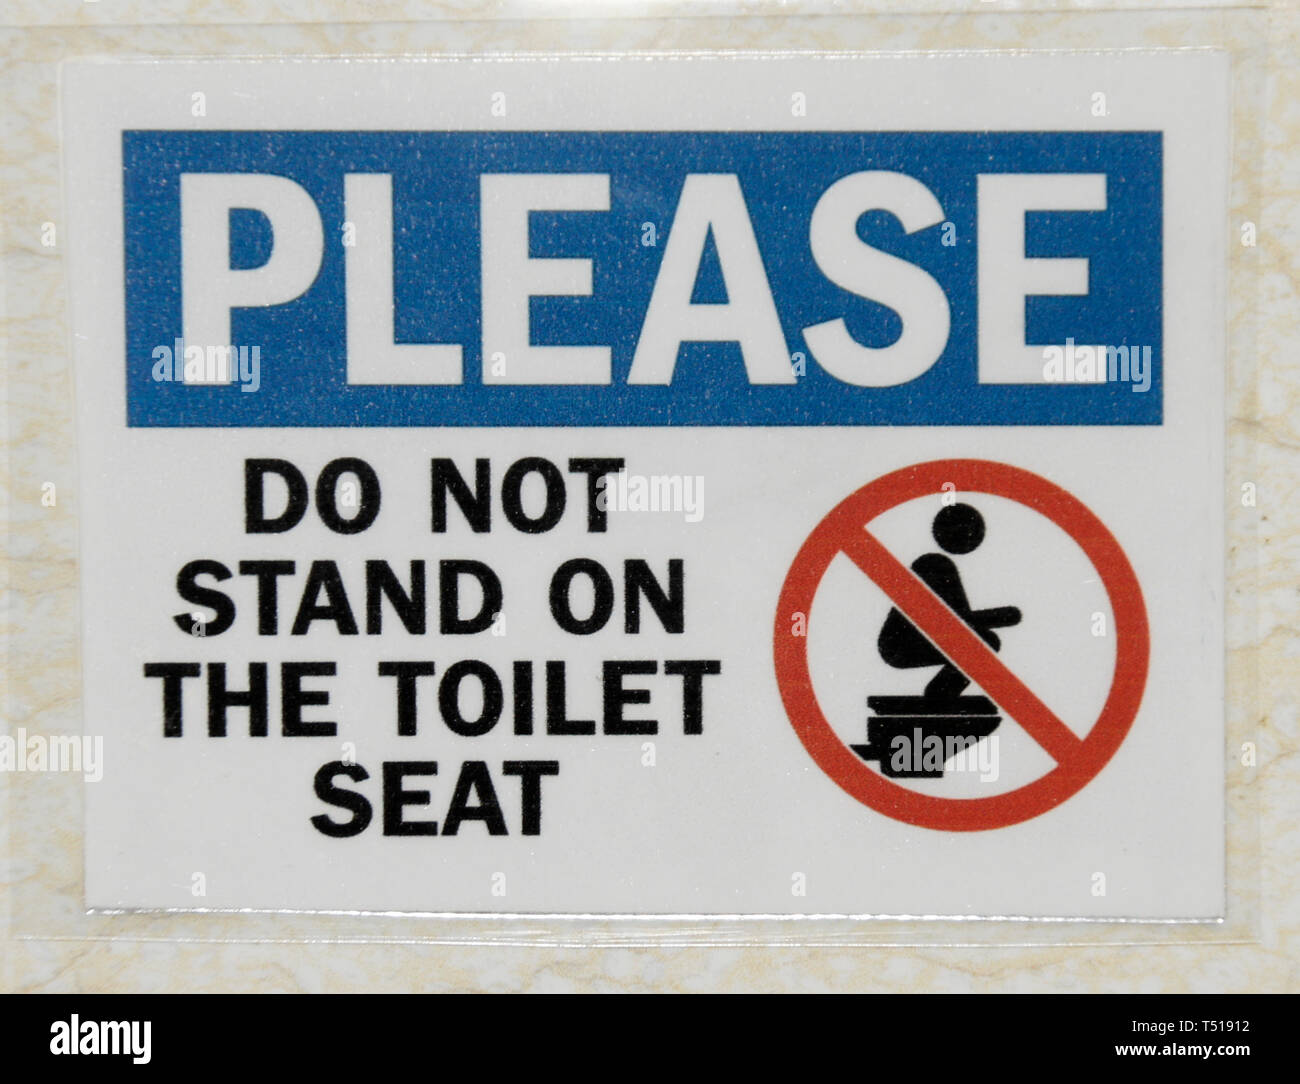 Sign warning user not to stand on toilet seat Stock Photo